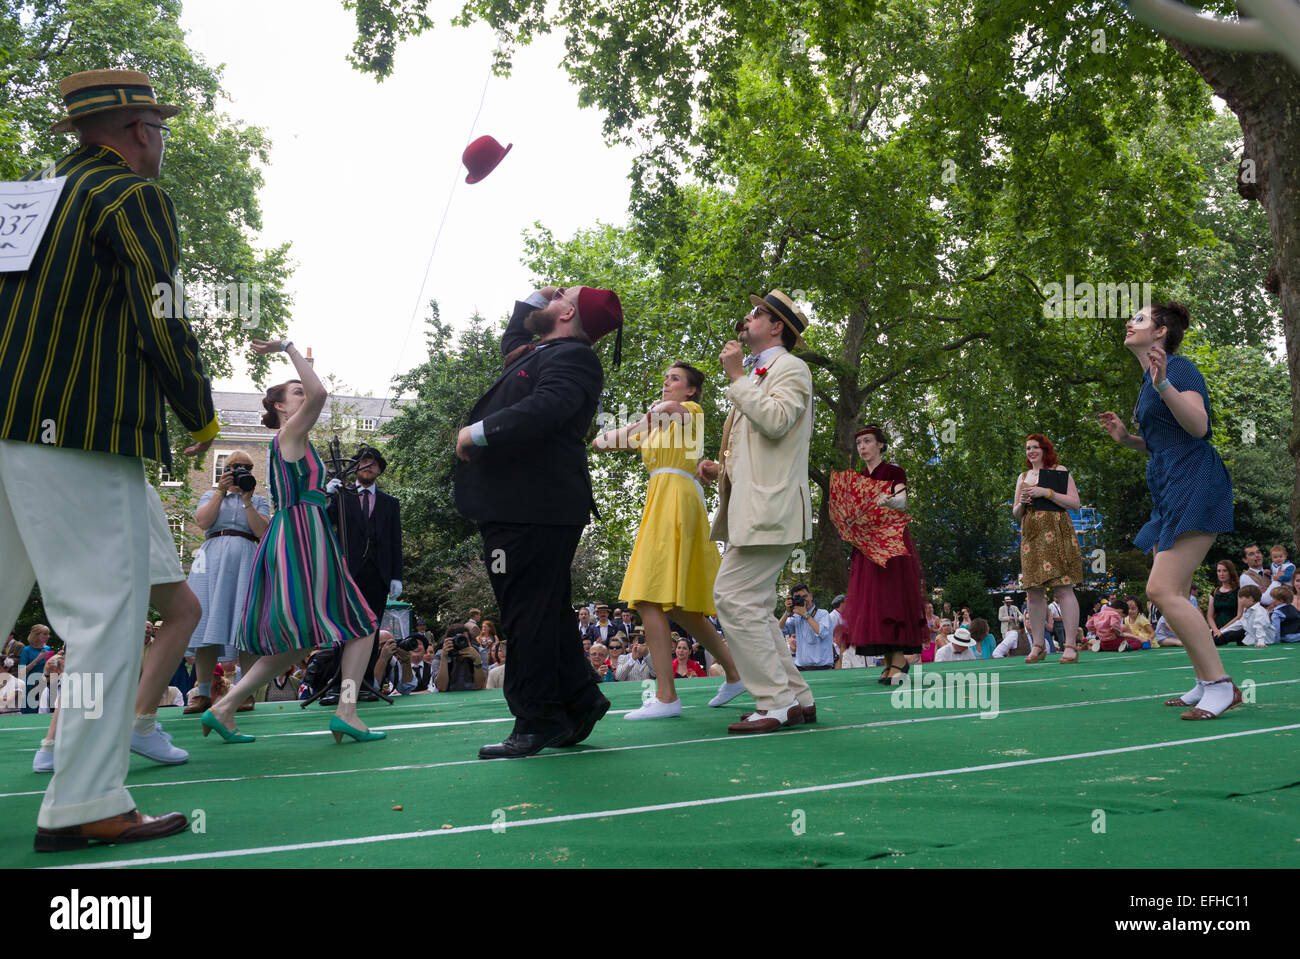 The 10 Anniversary of the Chap Olympiad. A sartorial gathering of chaps and chapesses in Bloomsbury London. Various Chap sports are held at a picnic in the square. Here people compete in Beach Volleybowler: volleyball with a red bowler hat, London, England Stock Photo